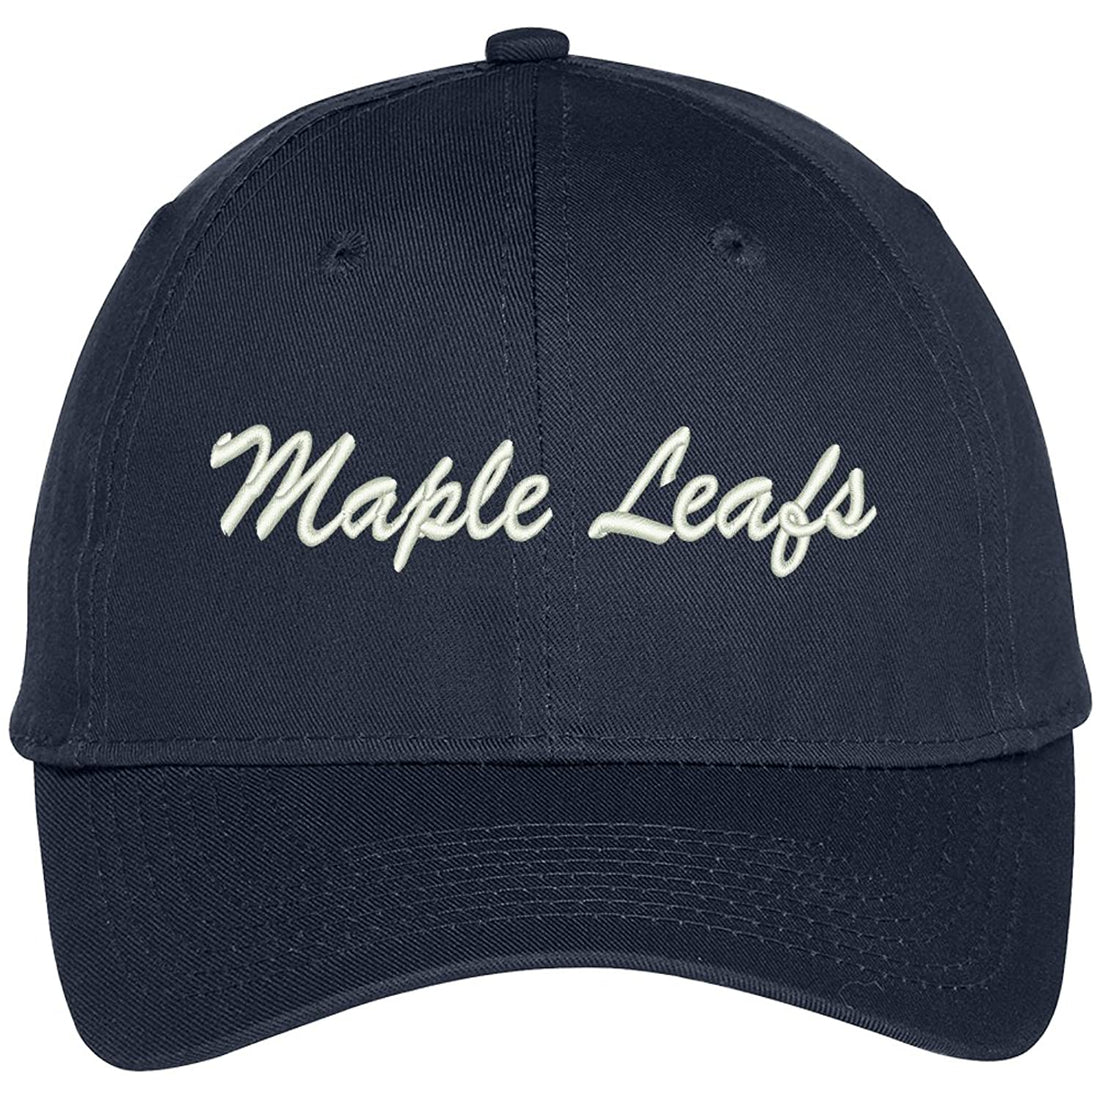 Trendy Apparel Shop Maple Leafs Embroidered Precurved Adjustable Cap